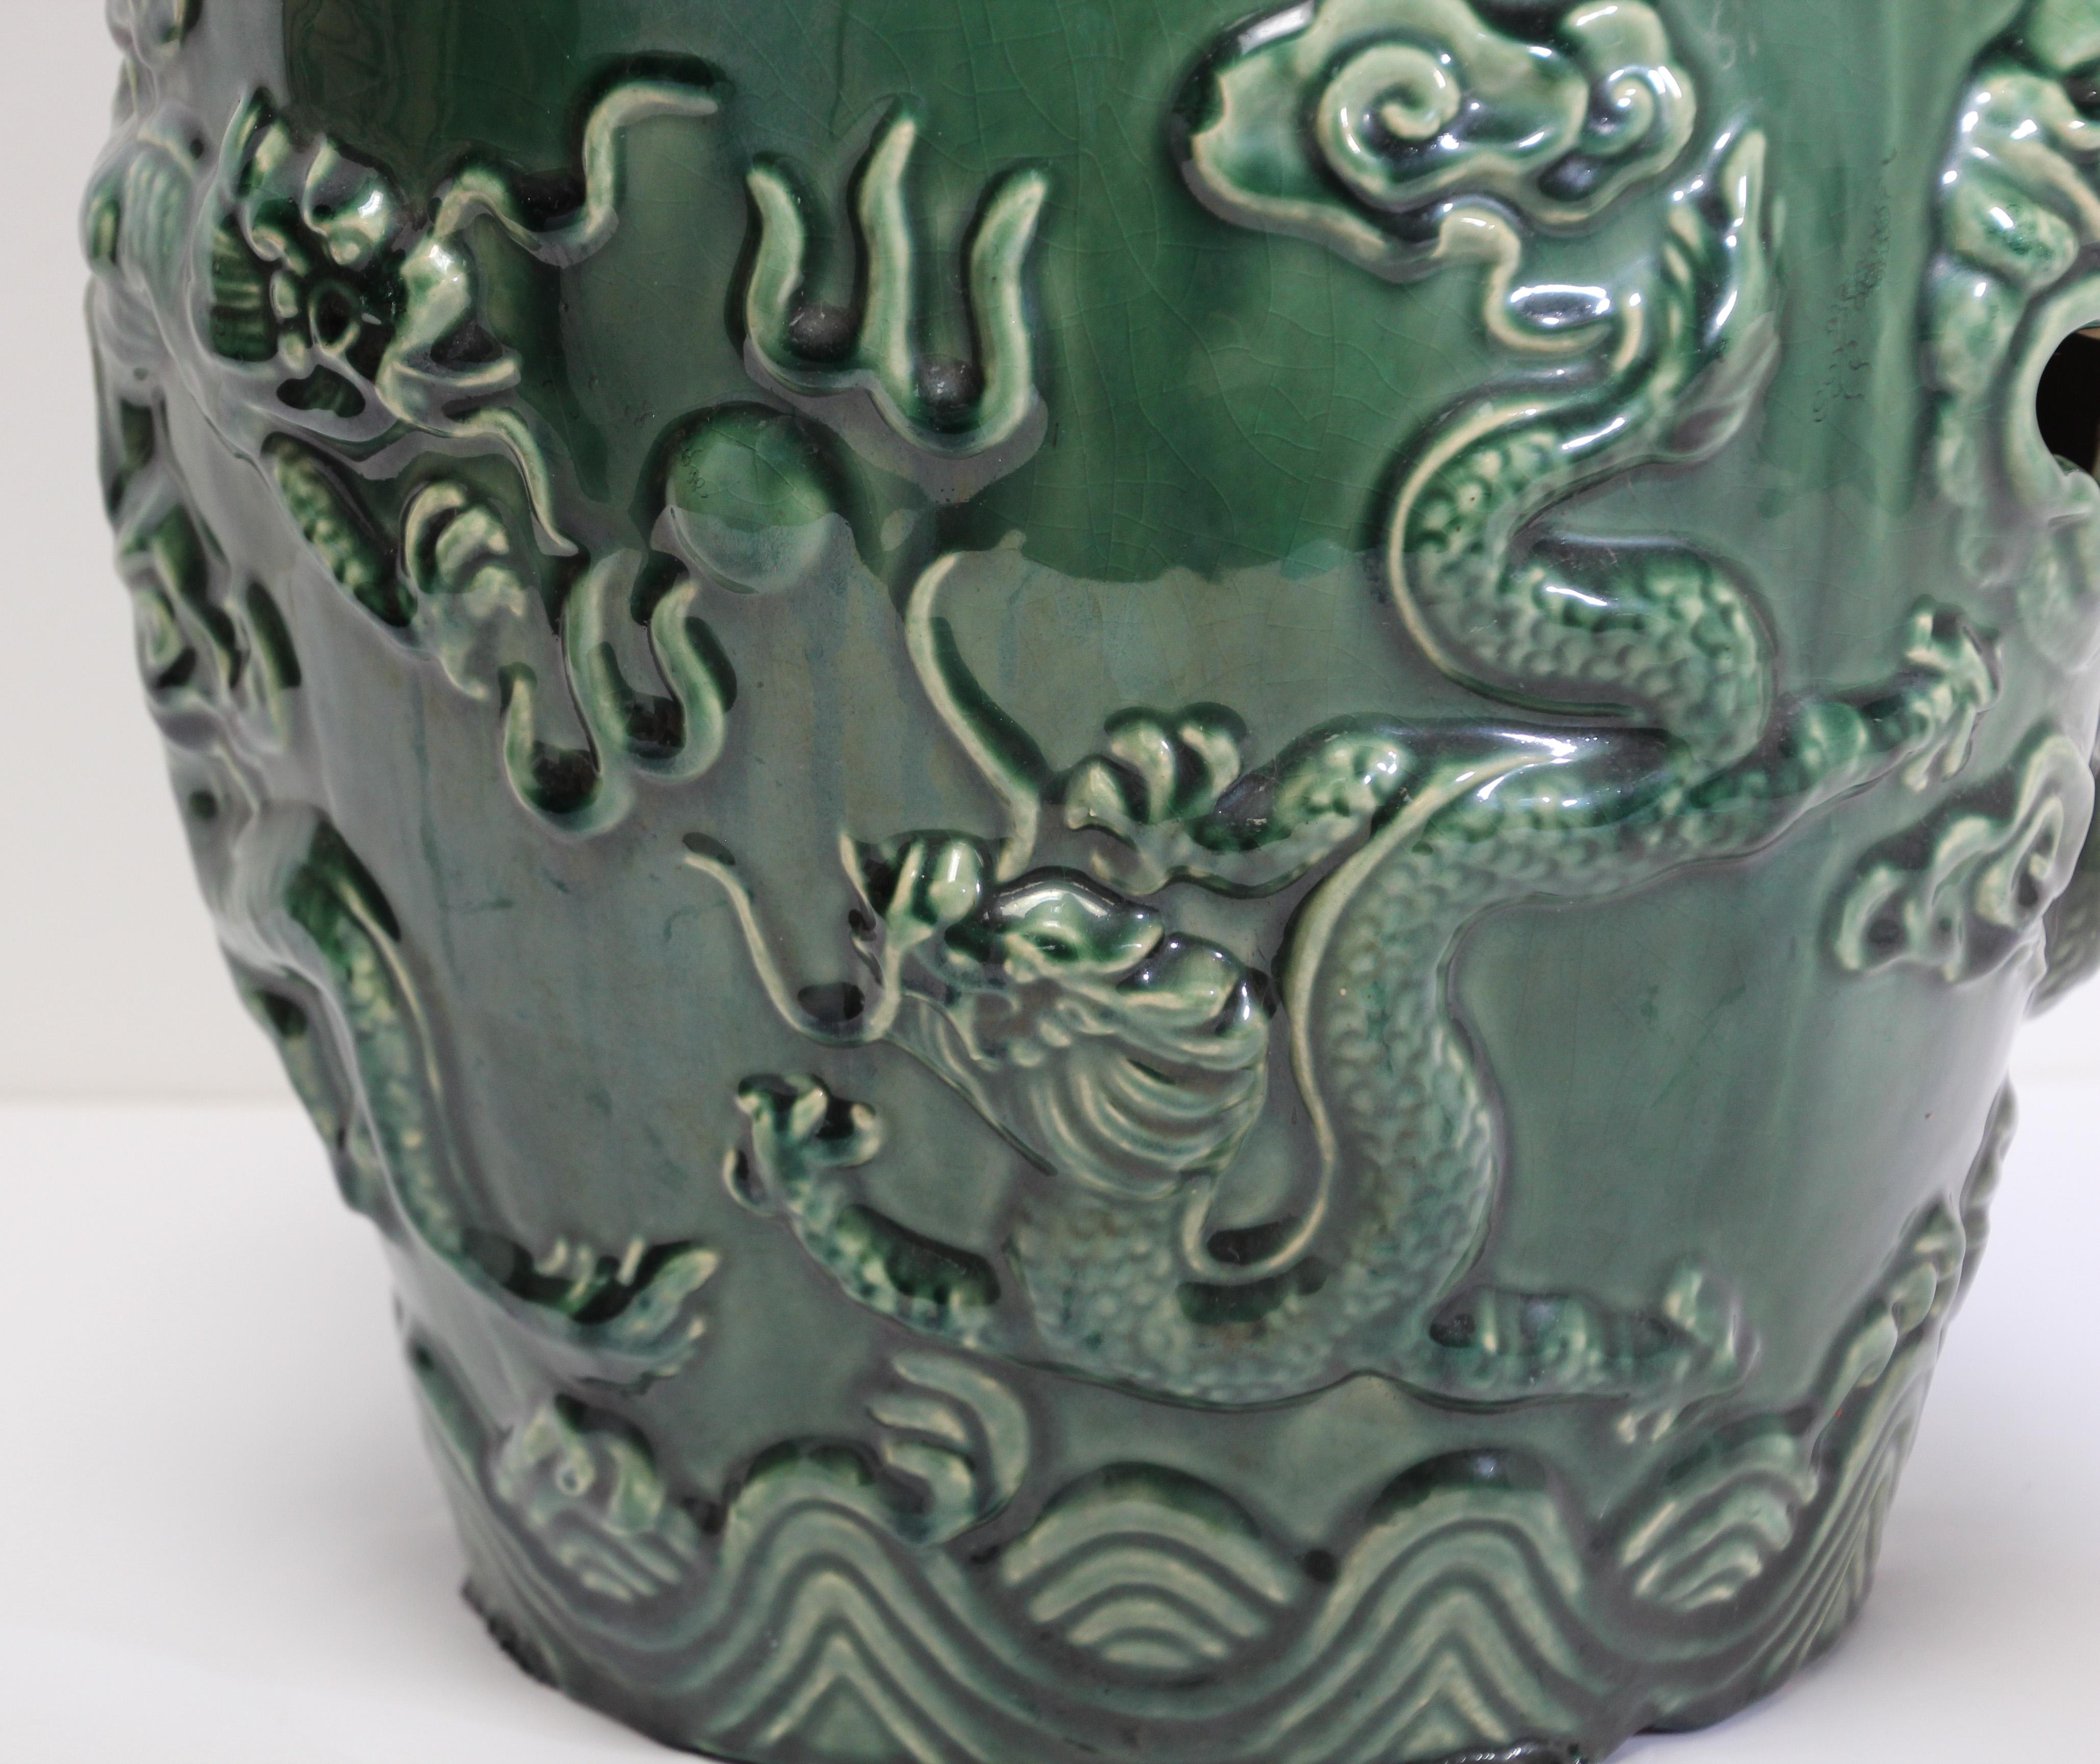 Emerald Green Chinese Ceramic Garden Stool with Dragons 9